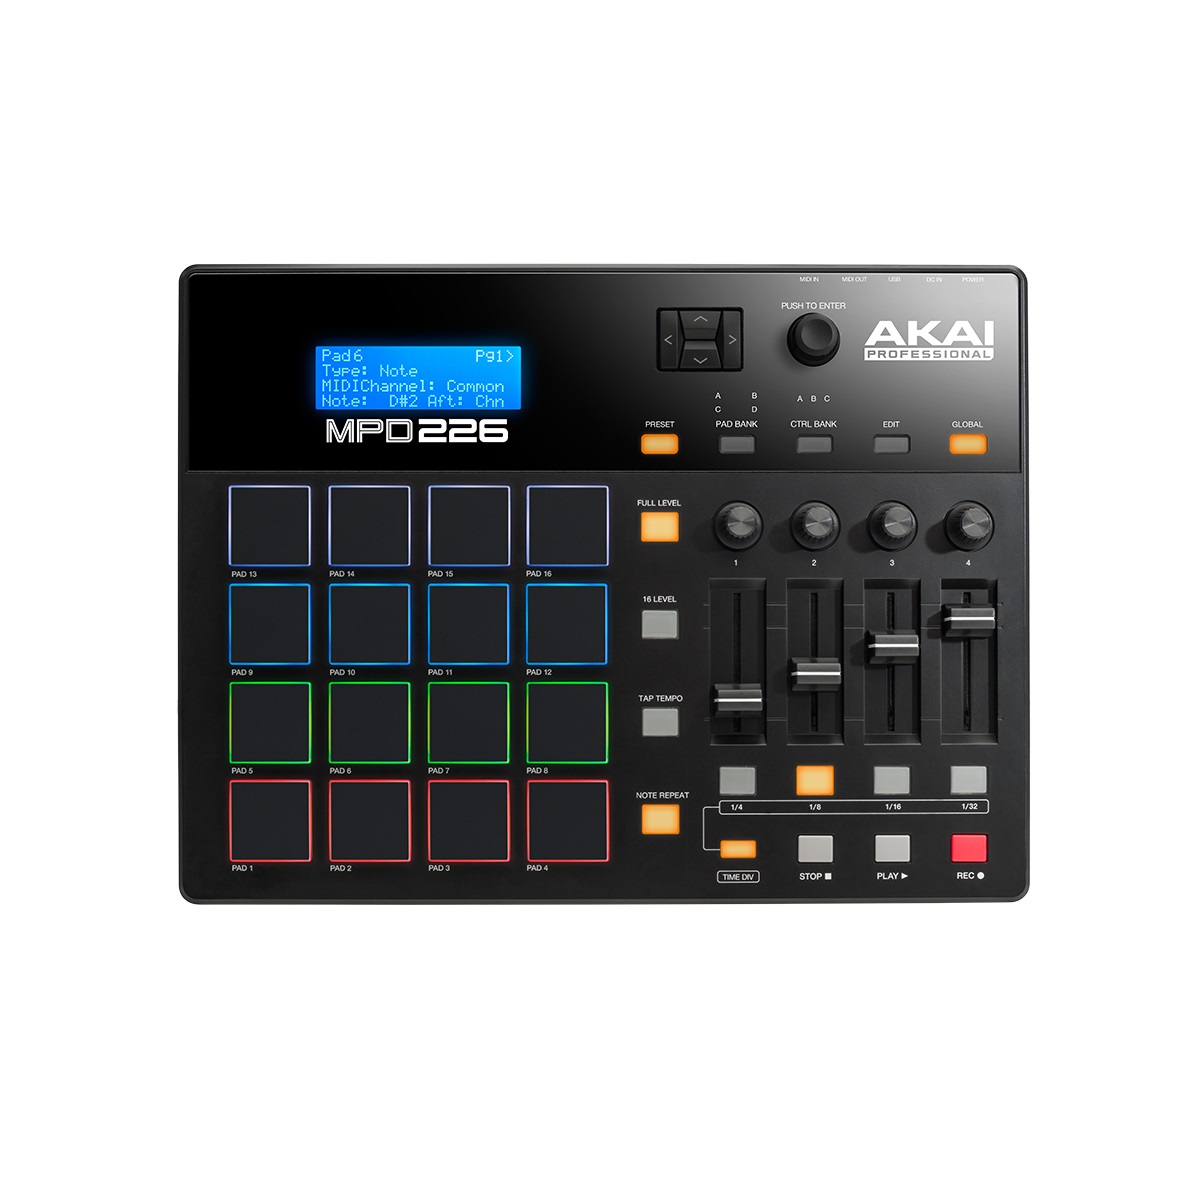 Akai Professional MPD226 USB Controller Online price in India